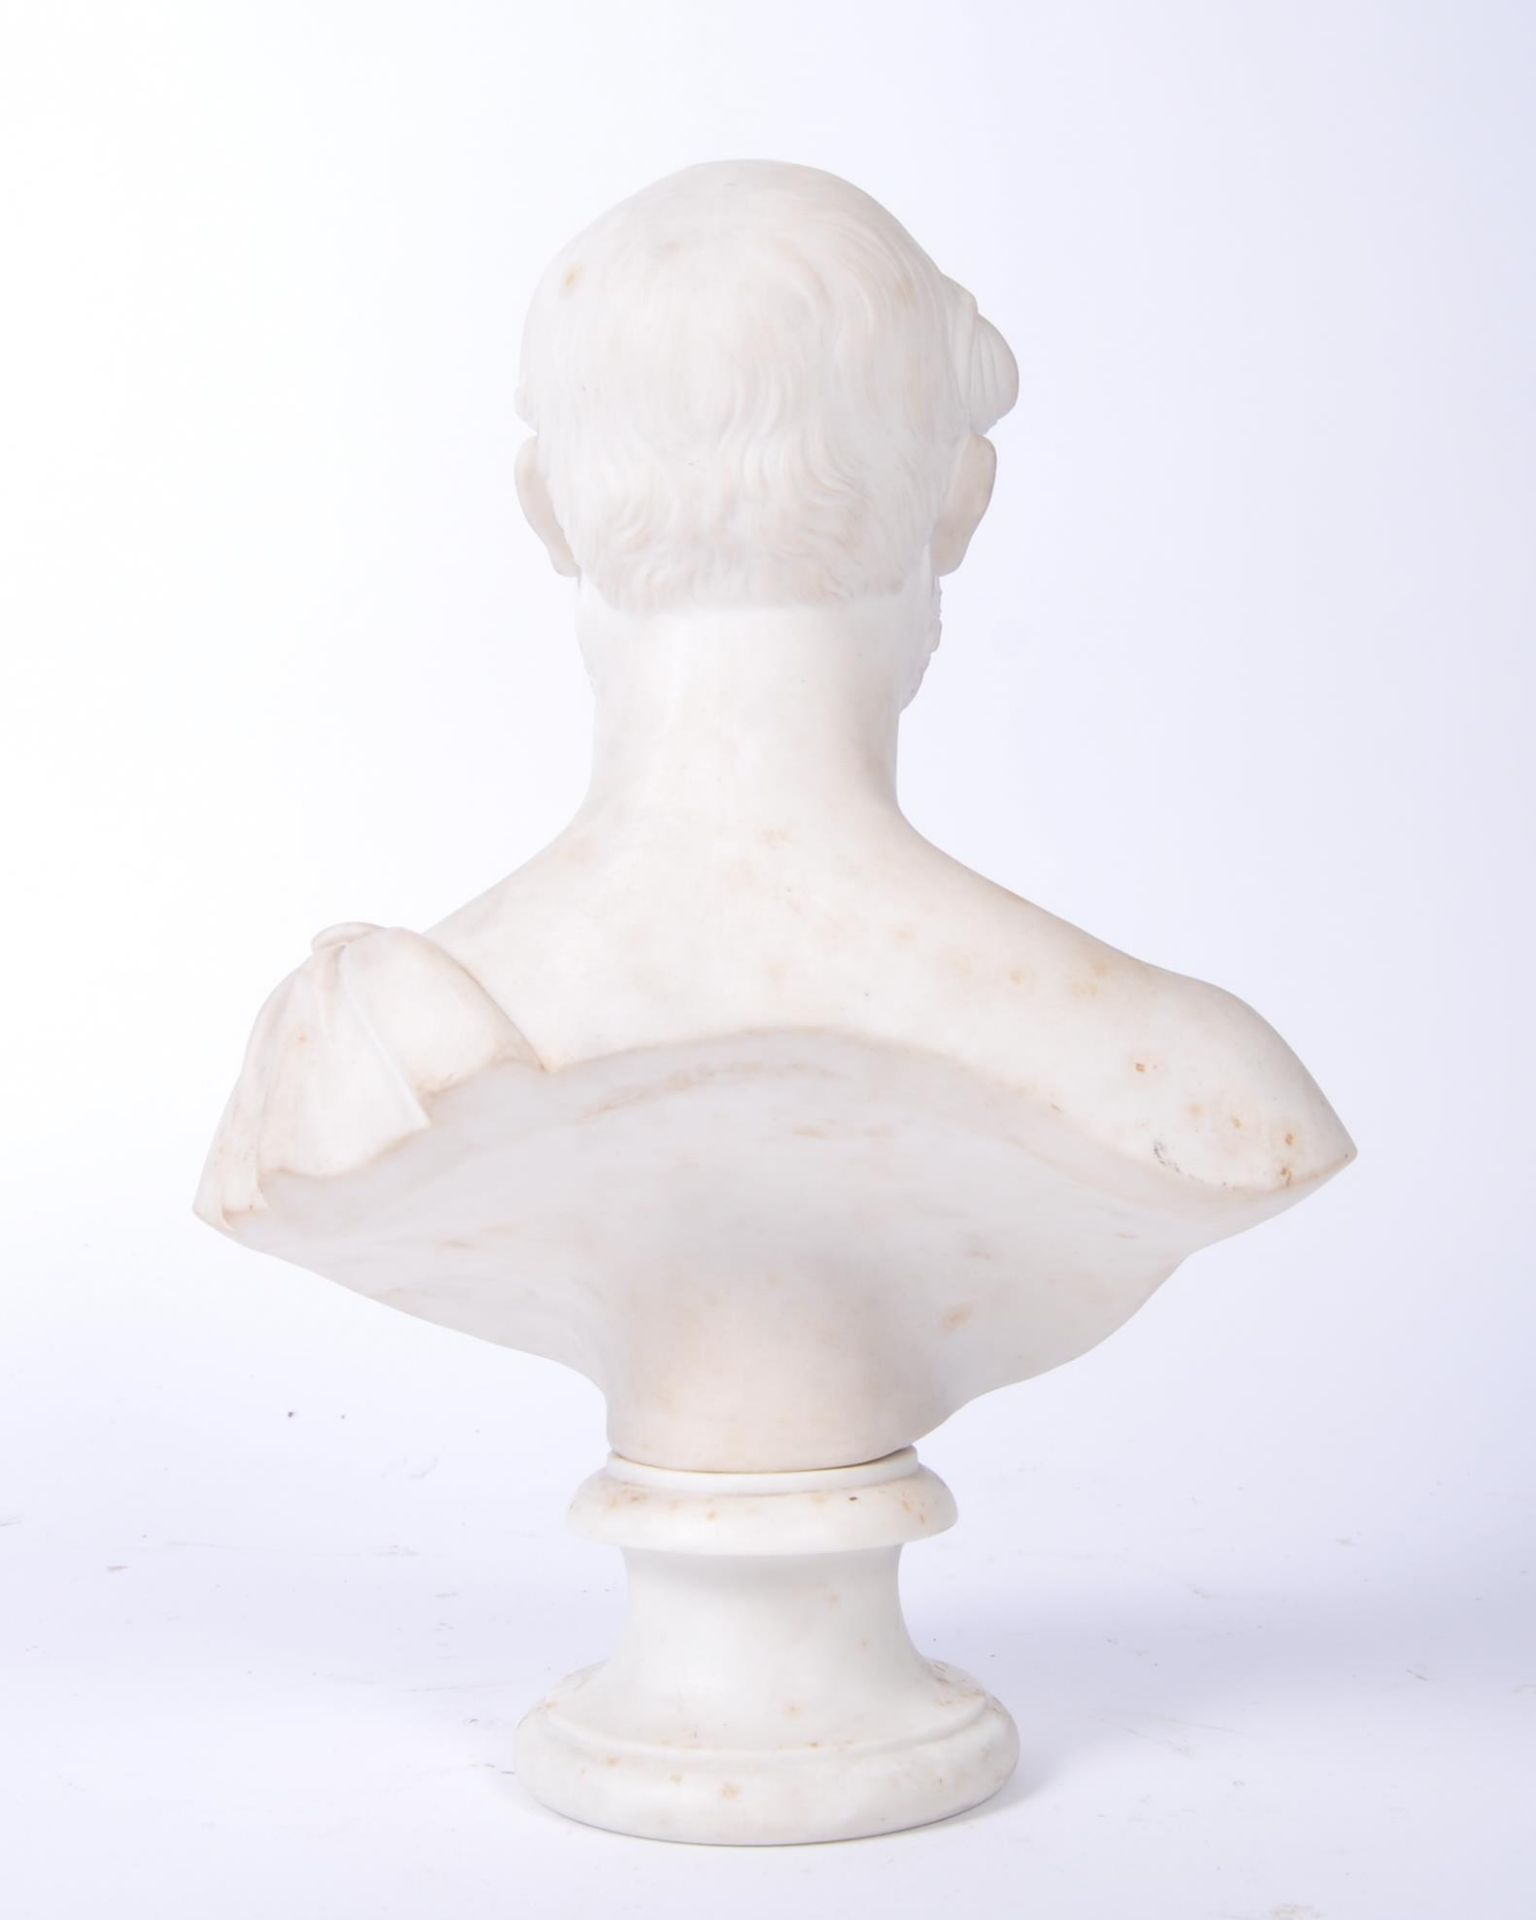 EARLY 20TH CENTURY PORCELAIN BISCUIT GLAZE ROMAN FIGURE - Image 5 of 7